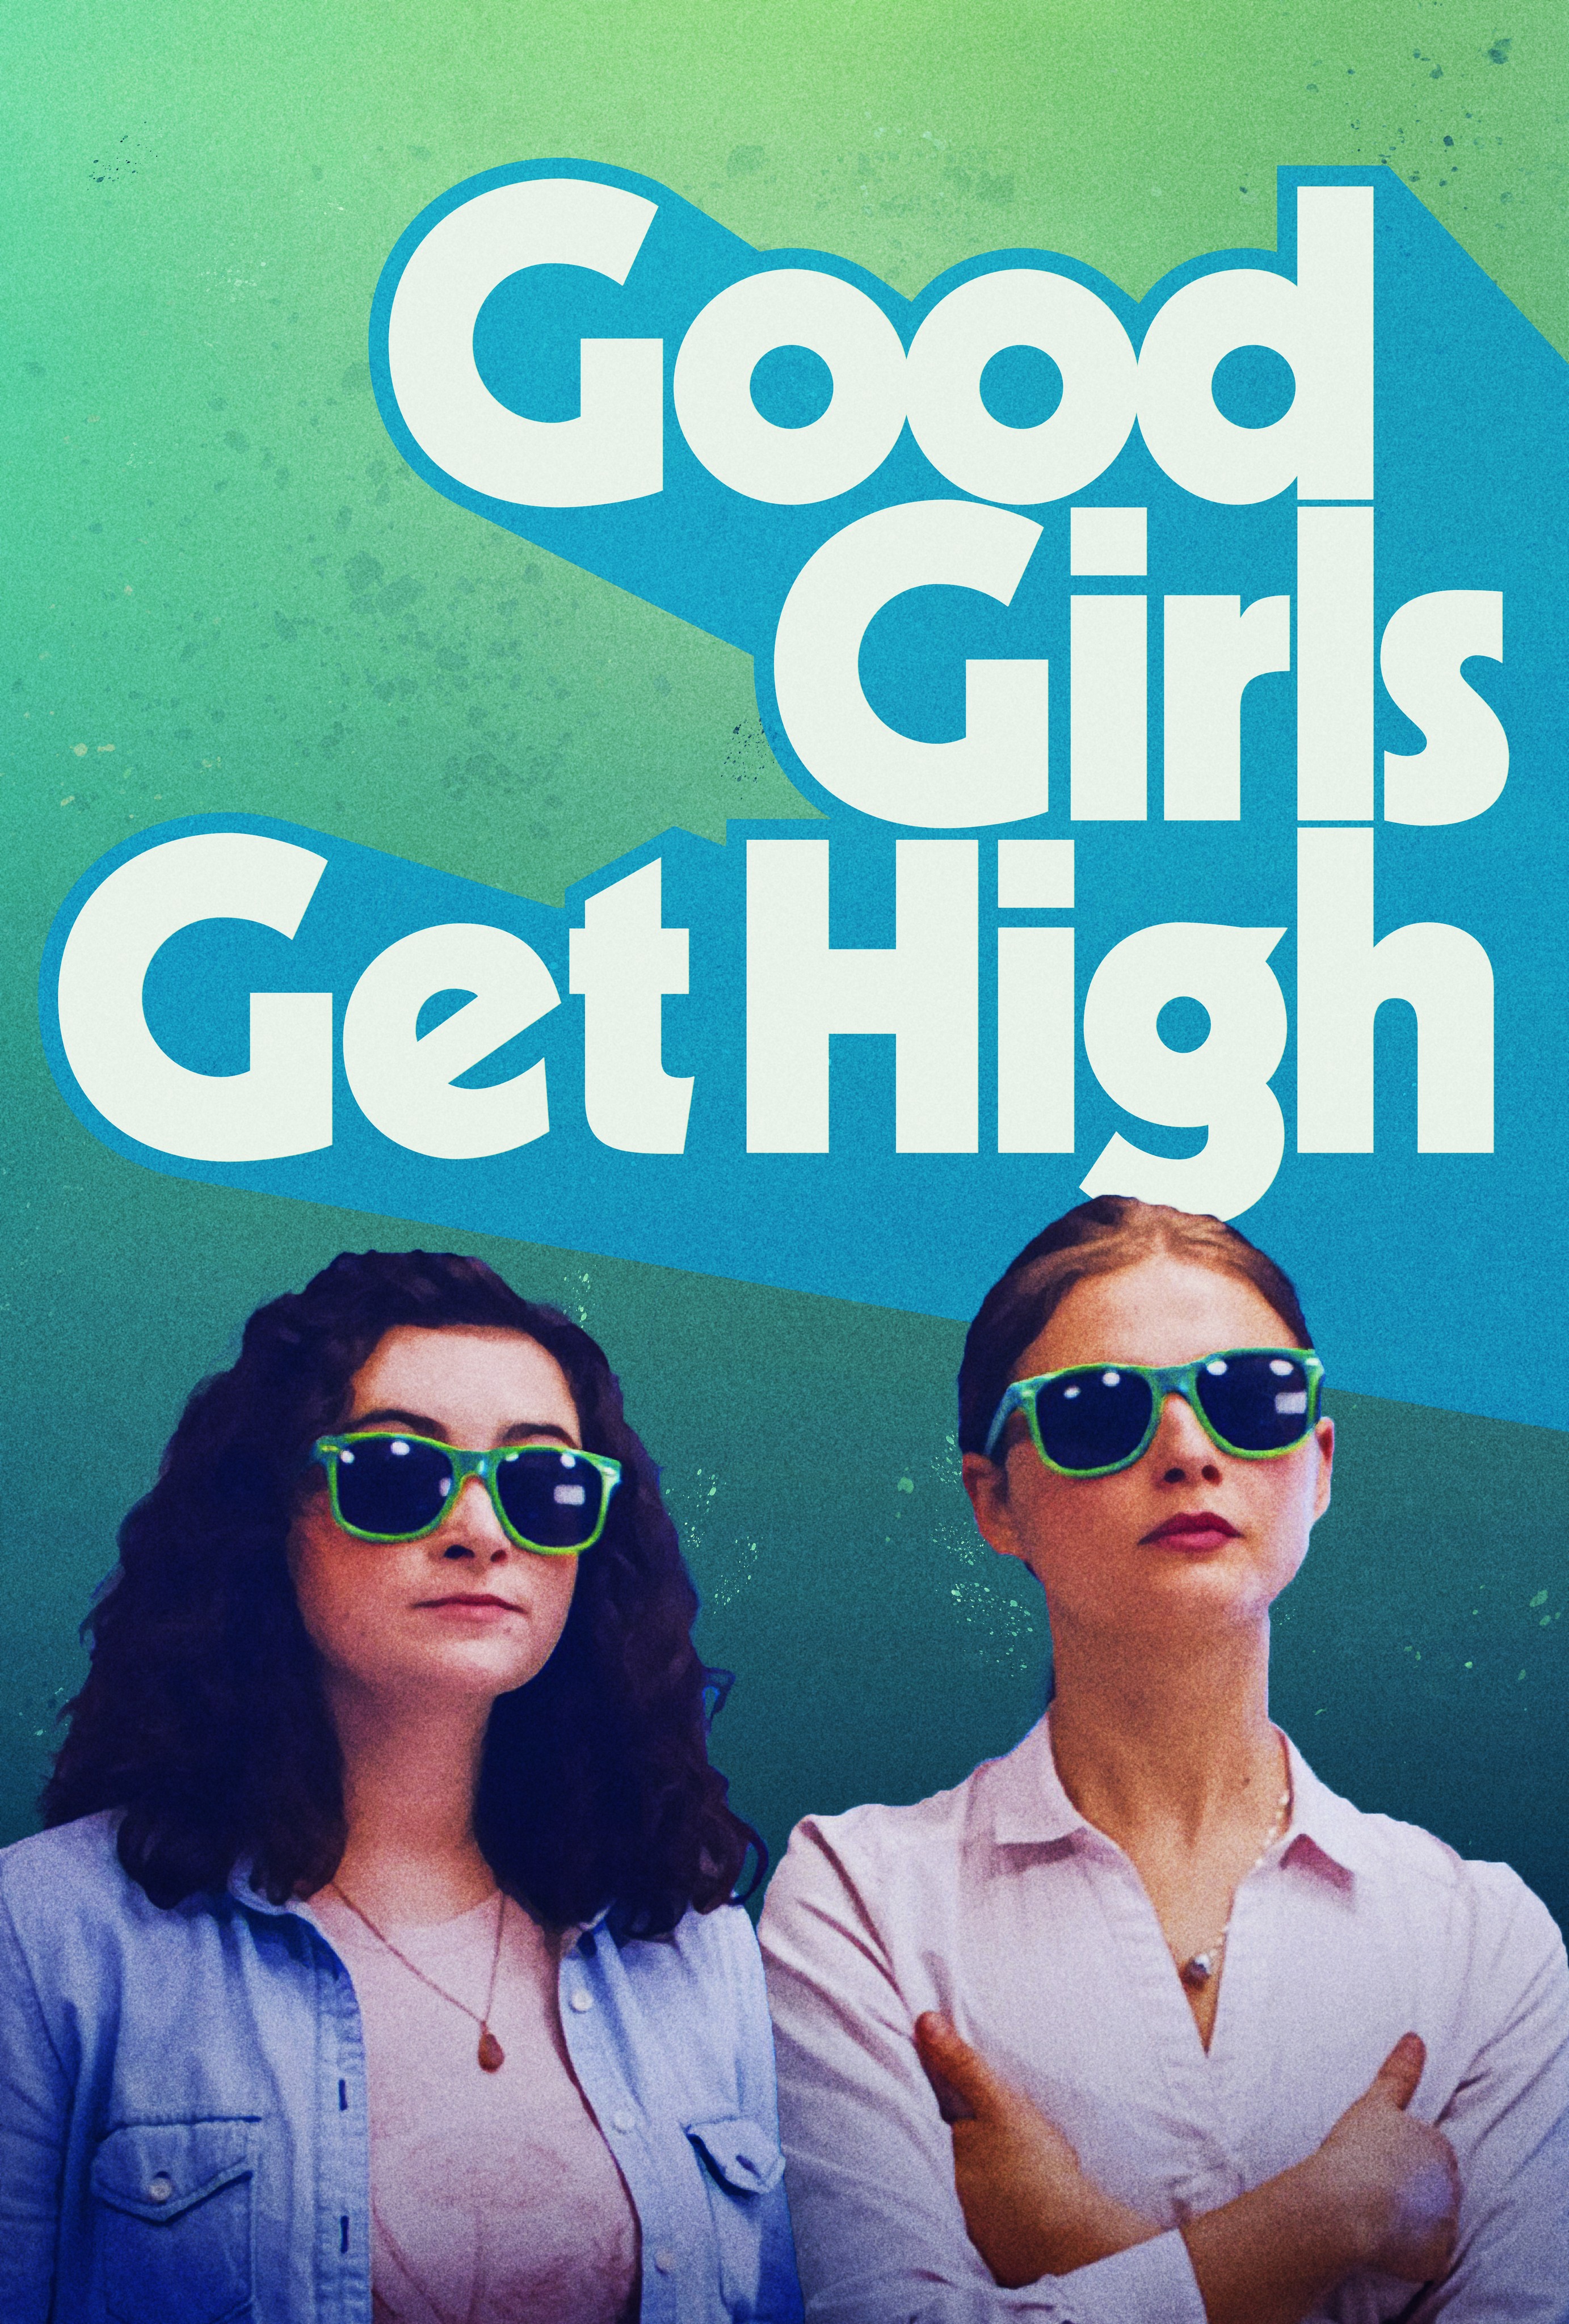 Good Girls Season 4 Netflix Series Review - Fast-paced and more exciting